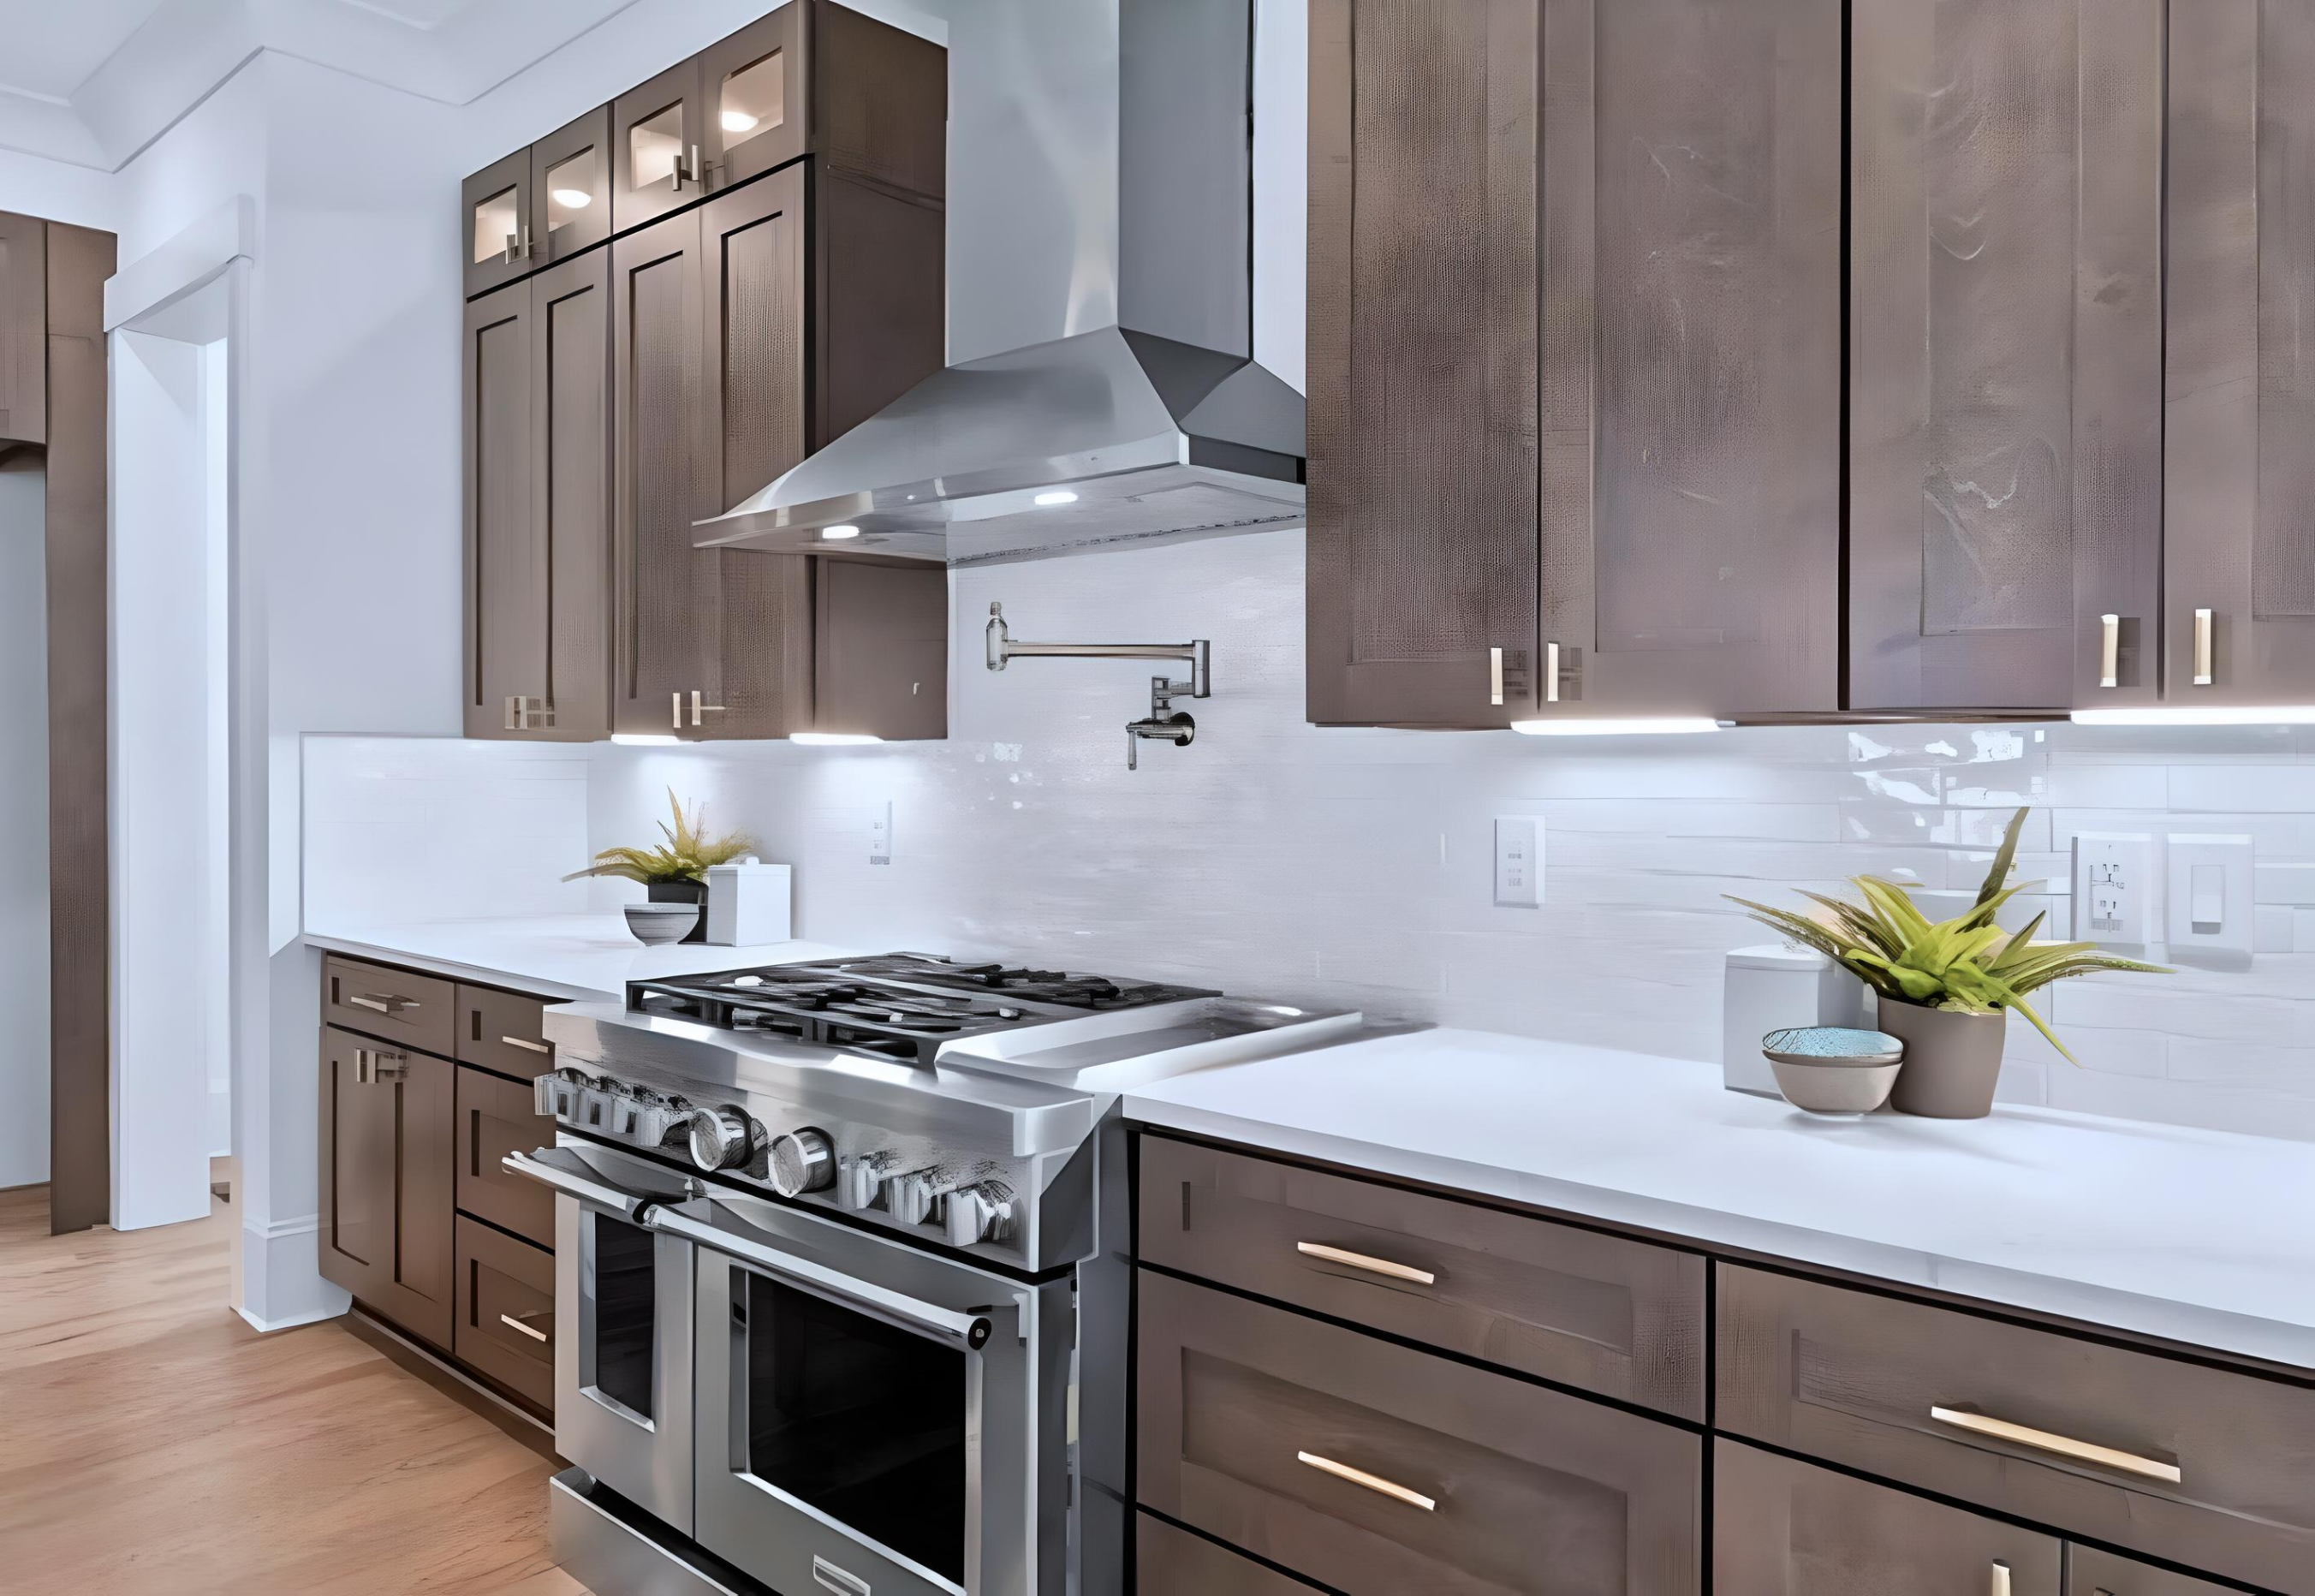 Revamp Your Space with L&C Cabinetry Ready-to-Assemble (RTA) Cabinets in Virginia Beach and Charlotte, NC